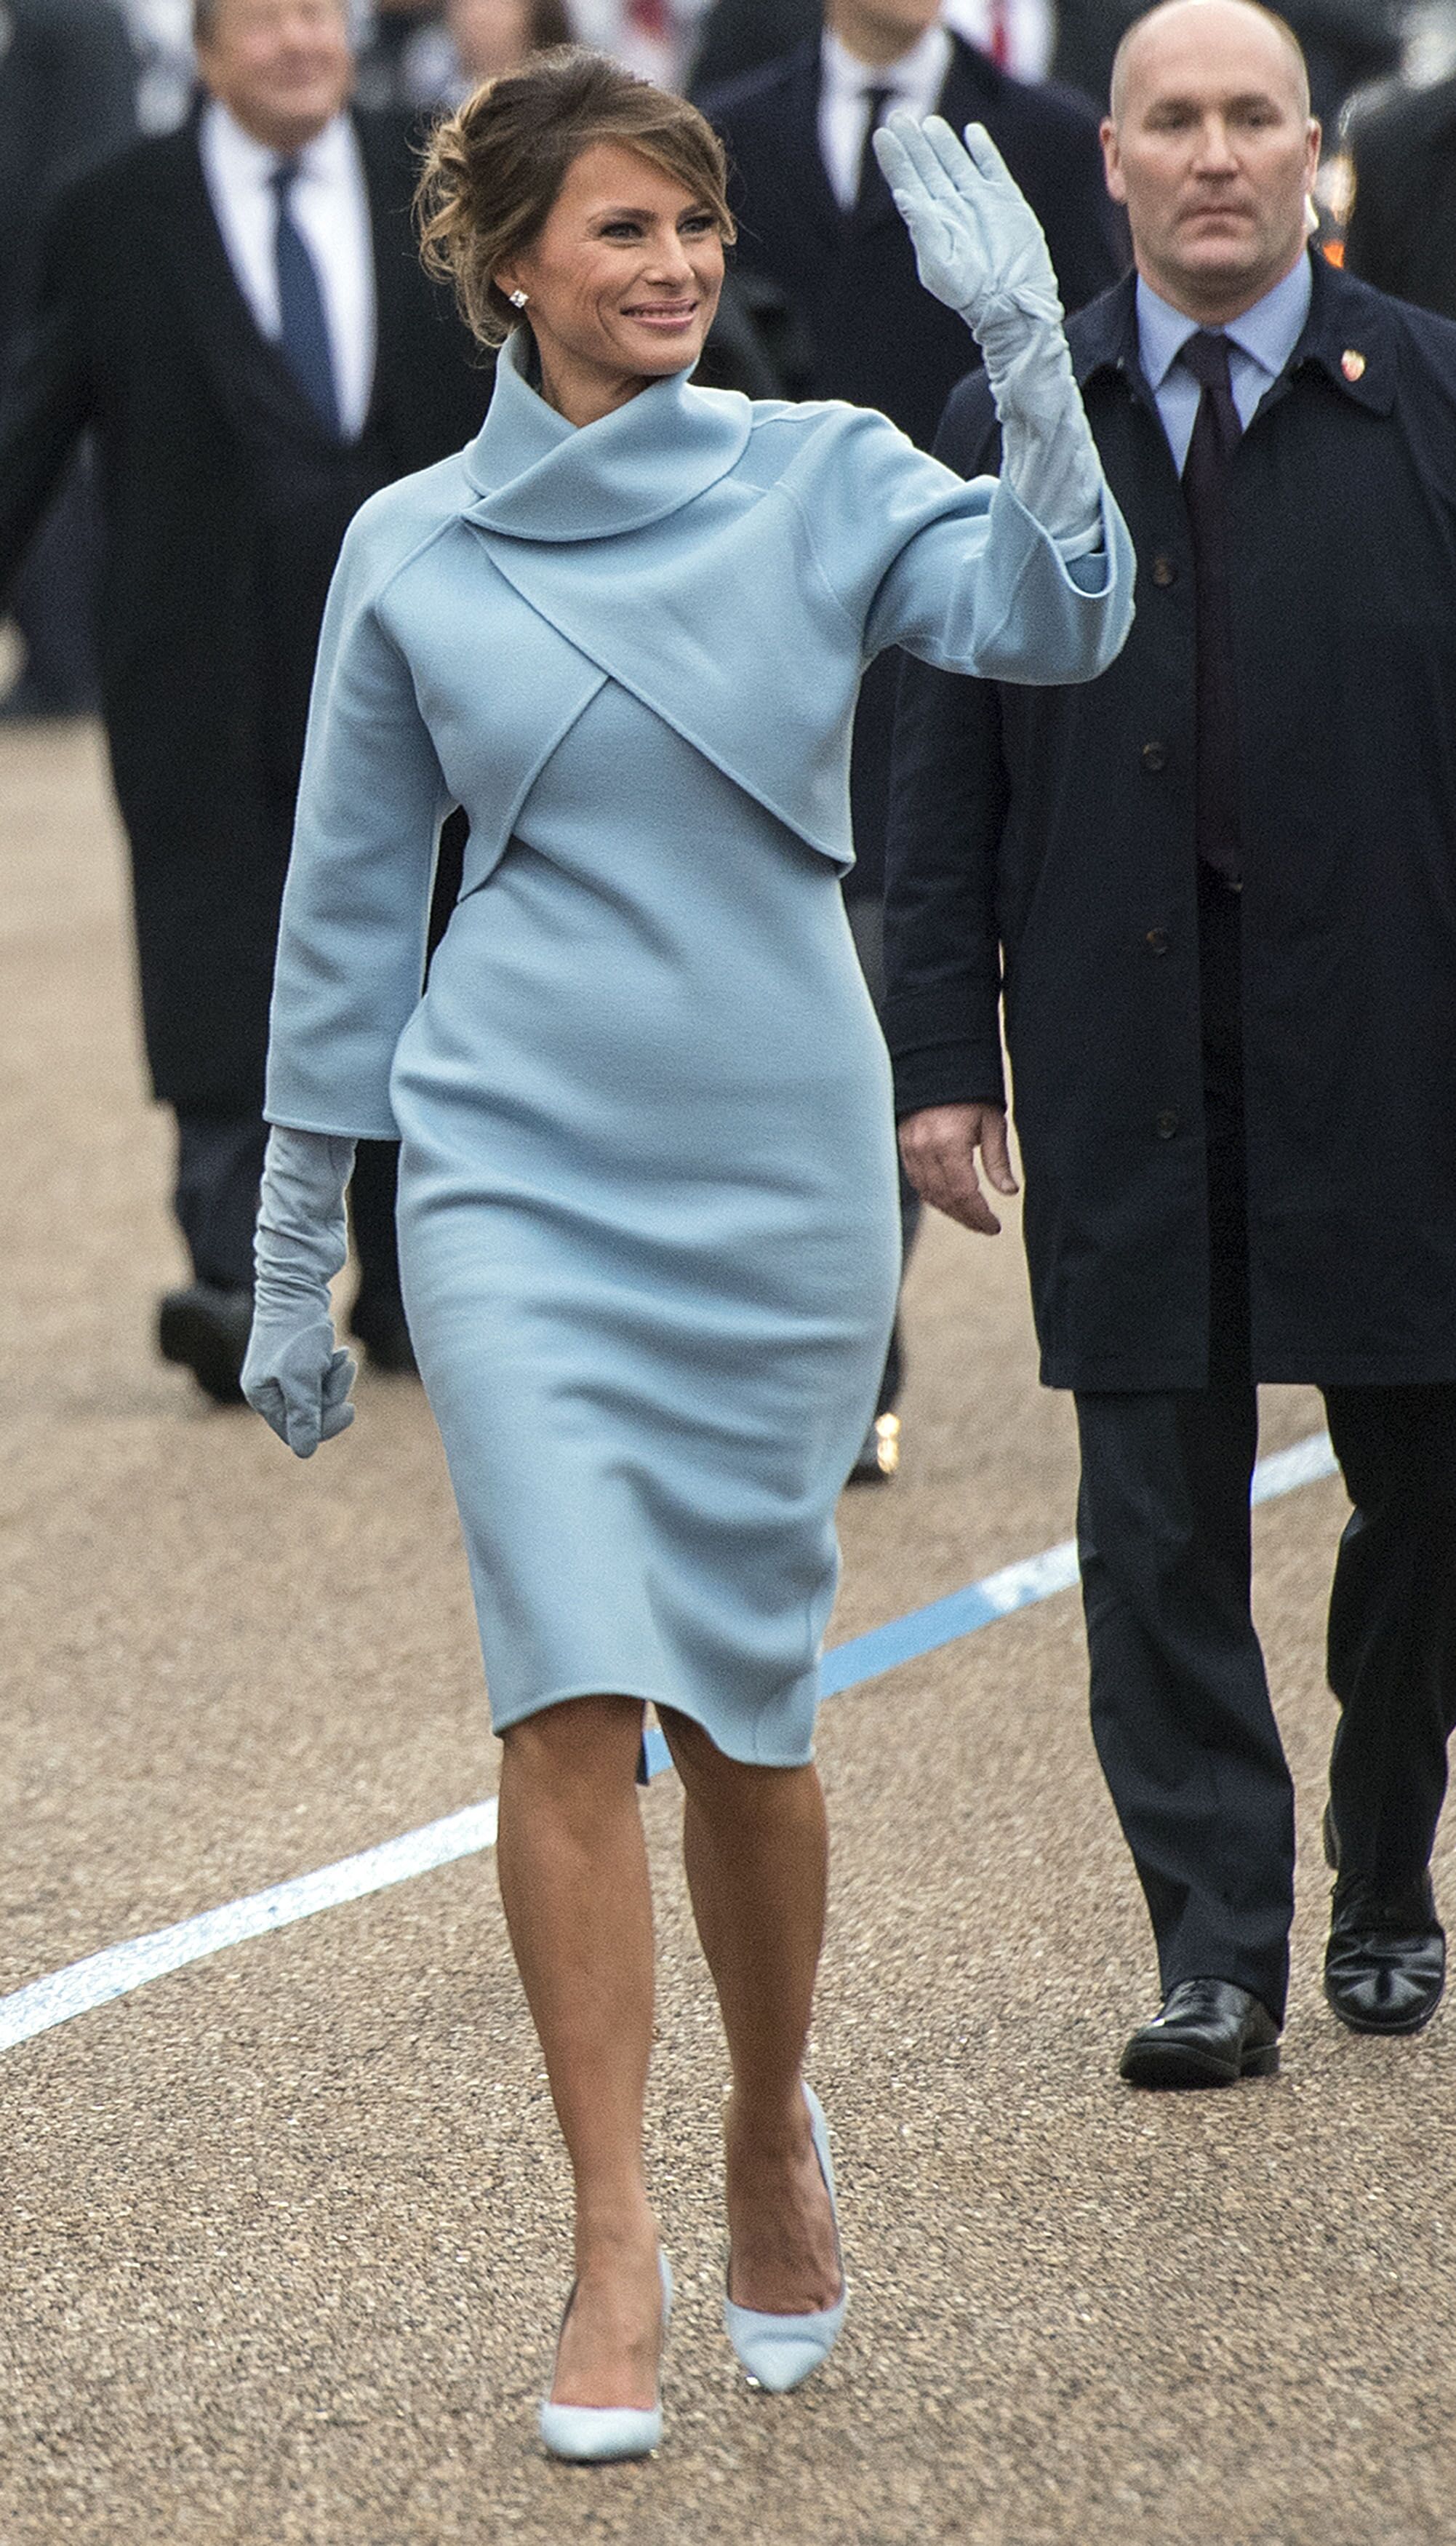  Melania Trump arrives at the White House on January 20, 2017 in Washington, DC | Source: Getty Images